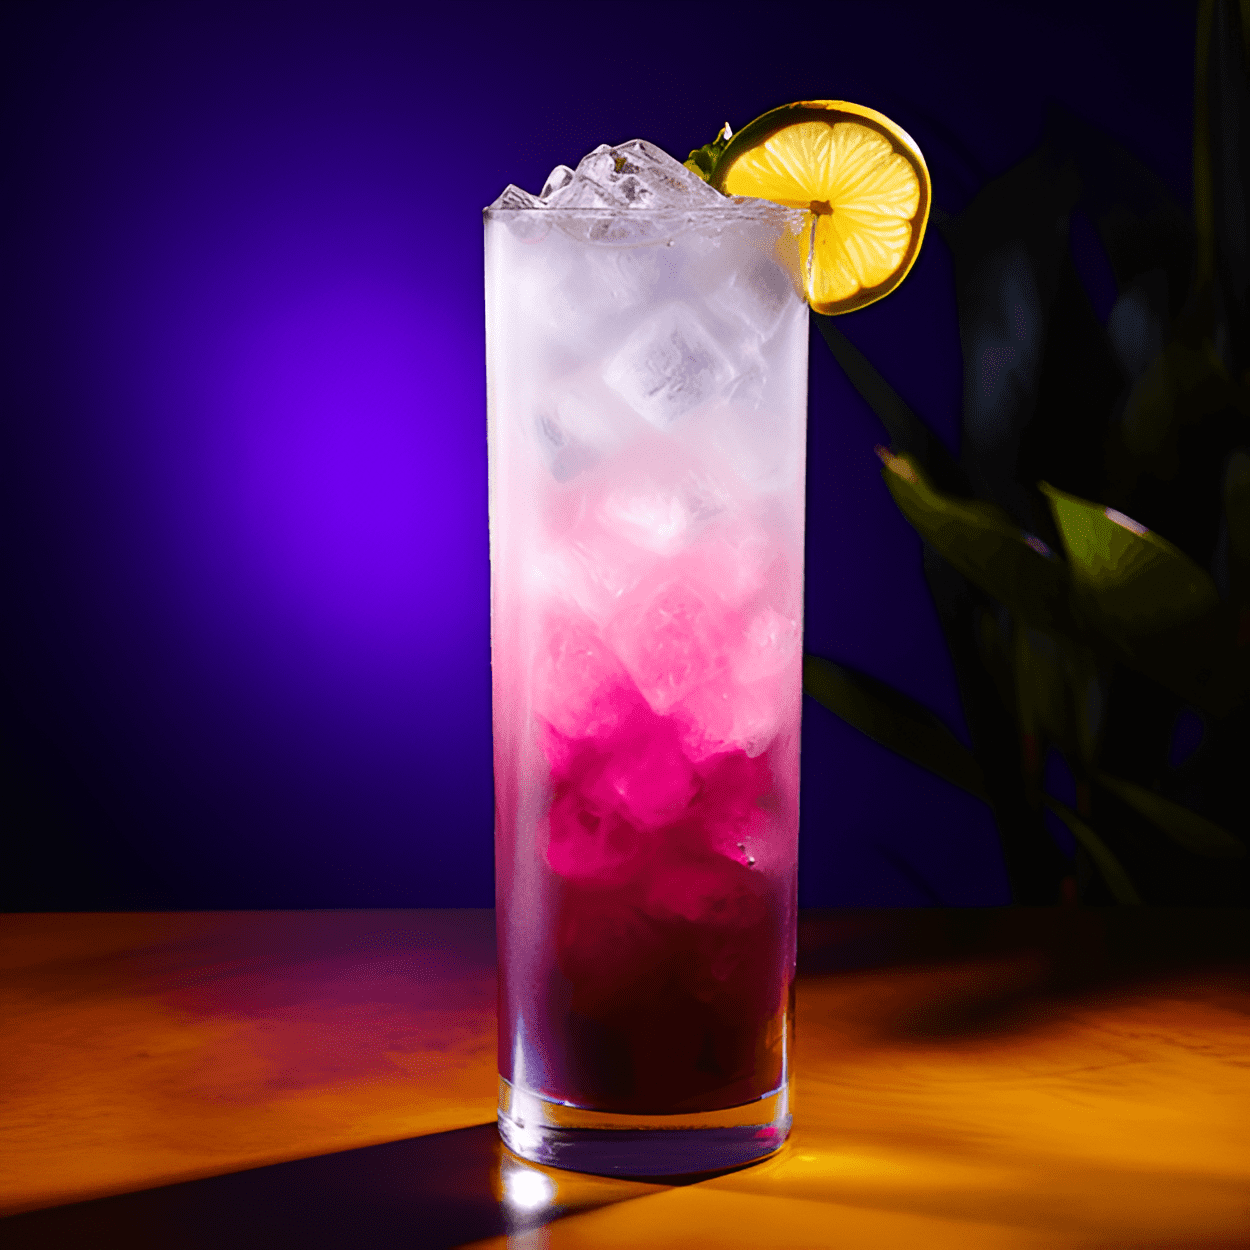 The Grape Ape cocktail is a sweet and fruity drink with a vibrant purple color. It has a refreshing and tangy taste, with a hint of sourness from the lemon-lime soda. The combination of grape vodka, blue curaçao, and cranberry juice creates a unique and delightful flavor.